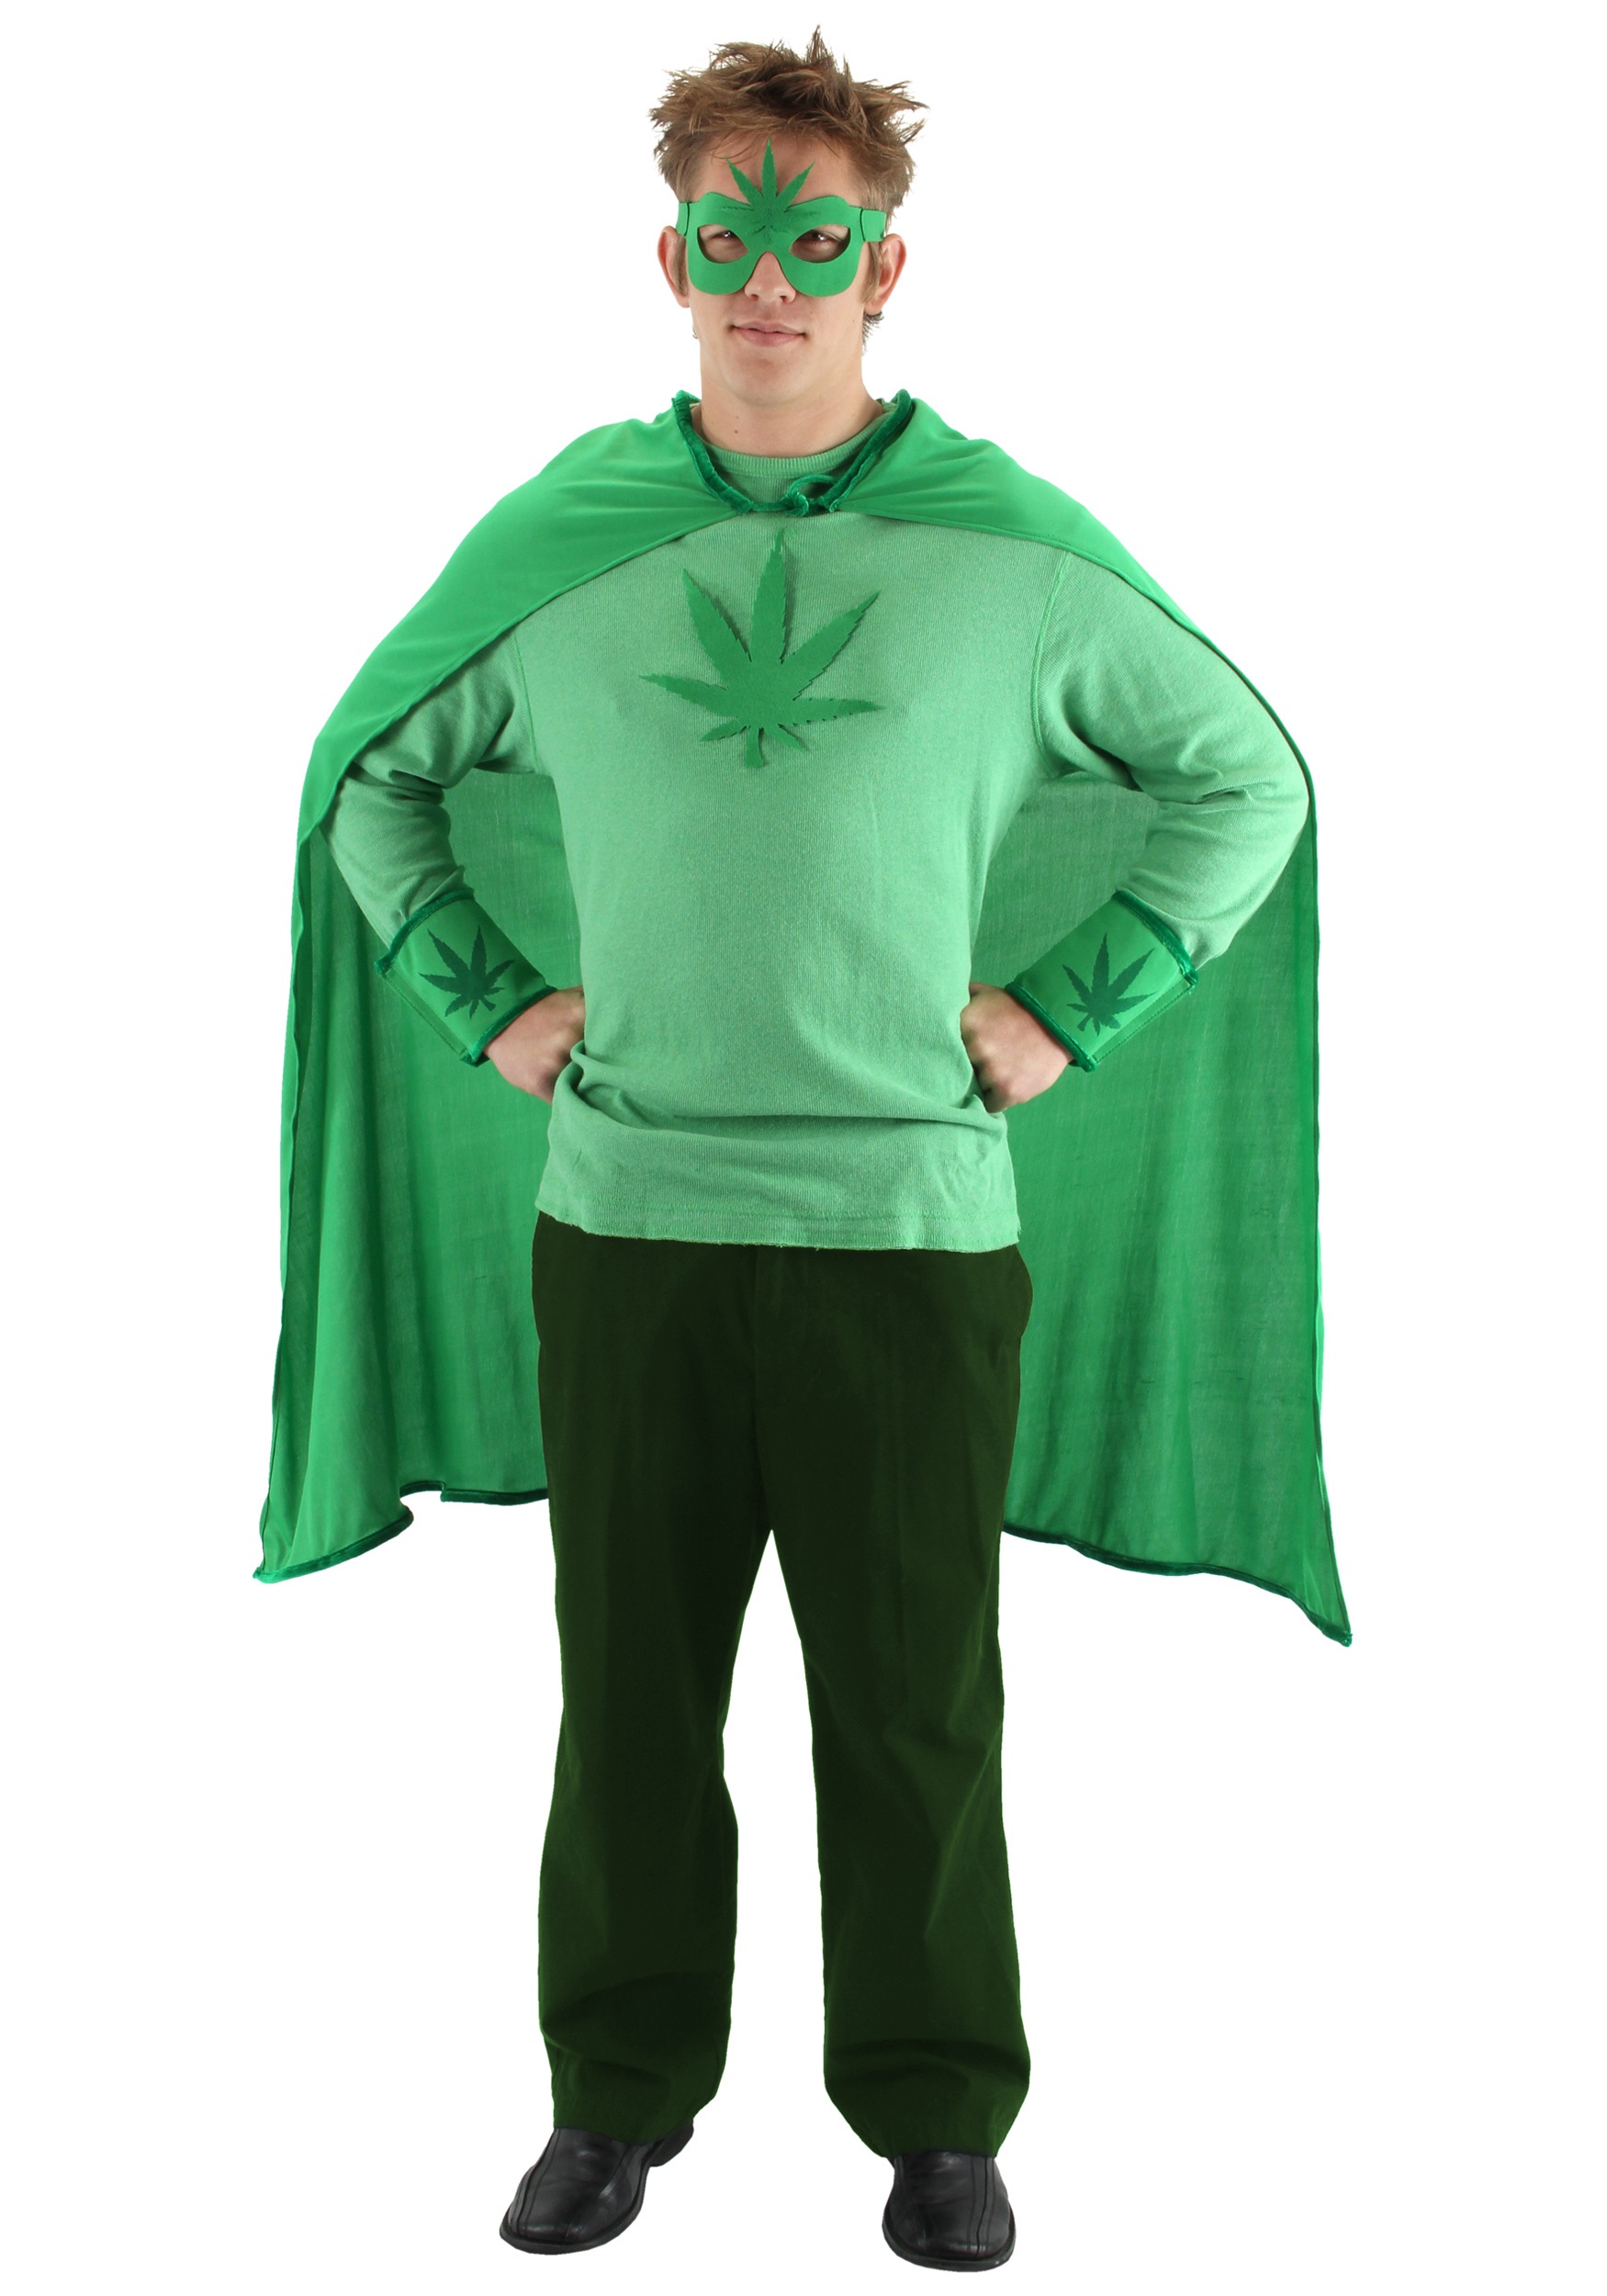 Weed Man Costume Kit Funny Picture